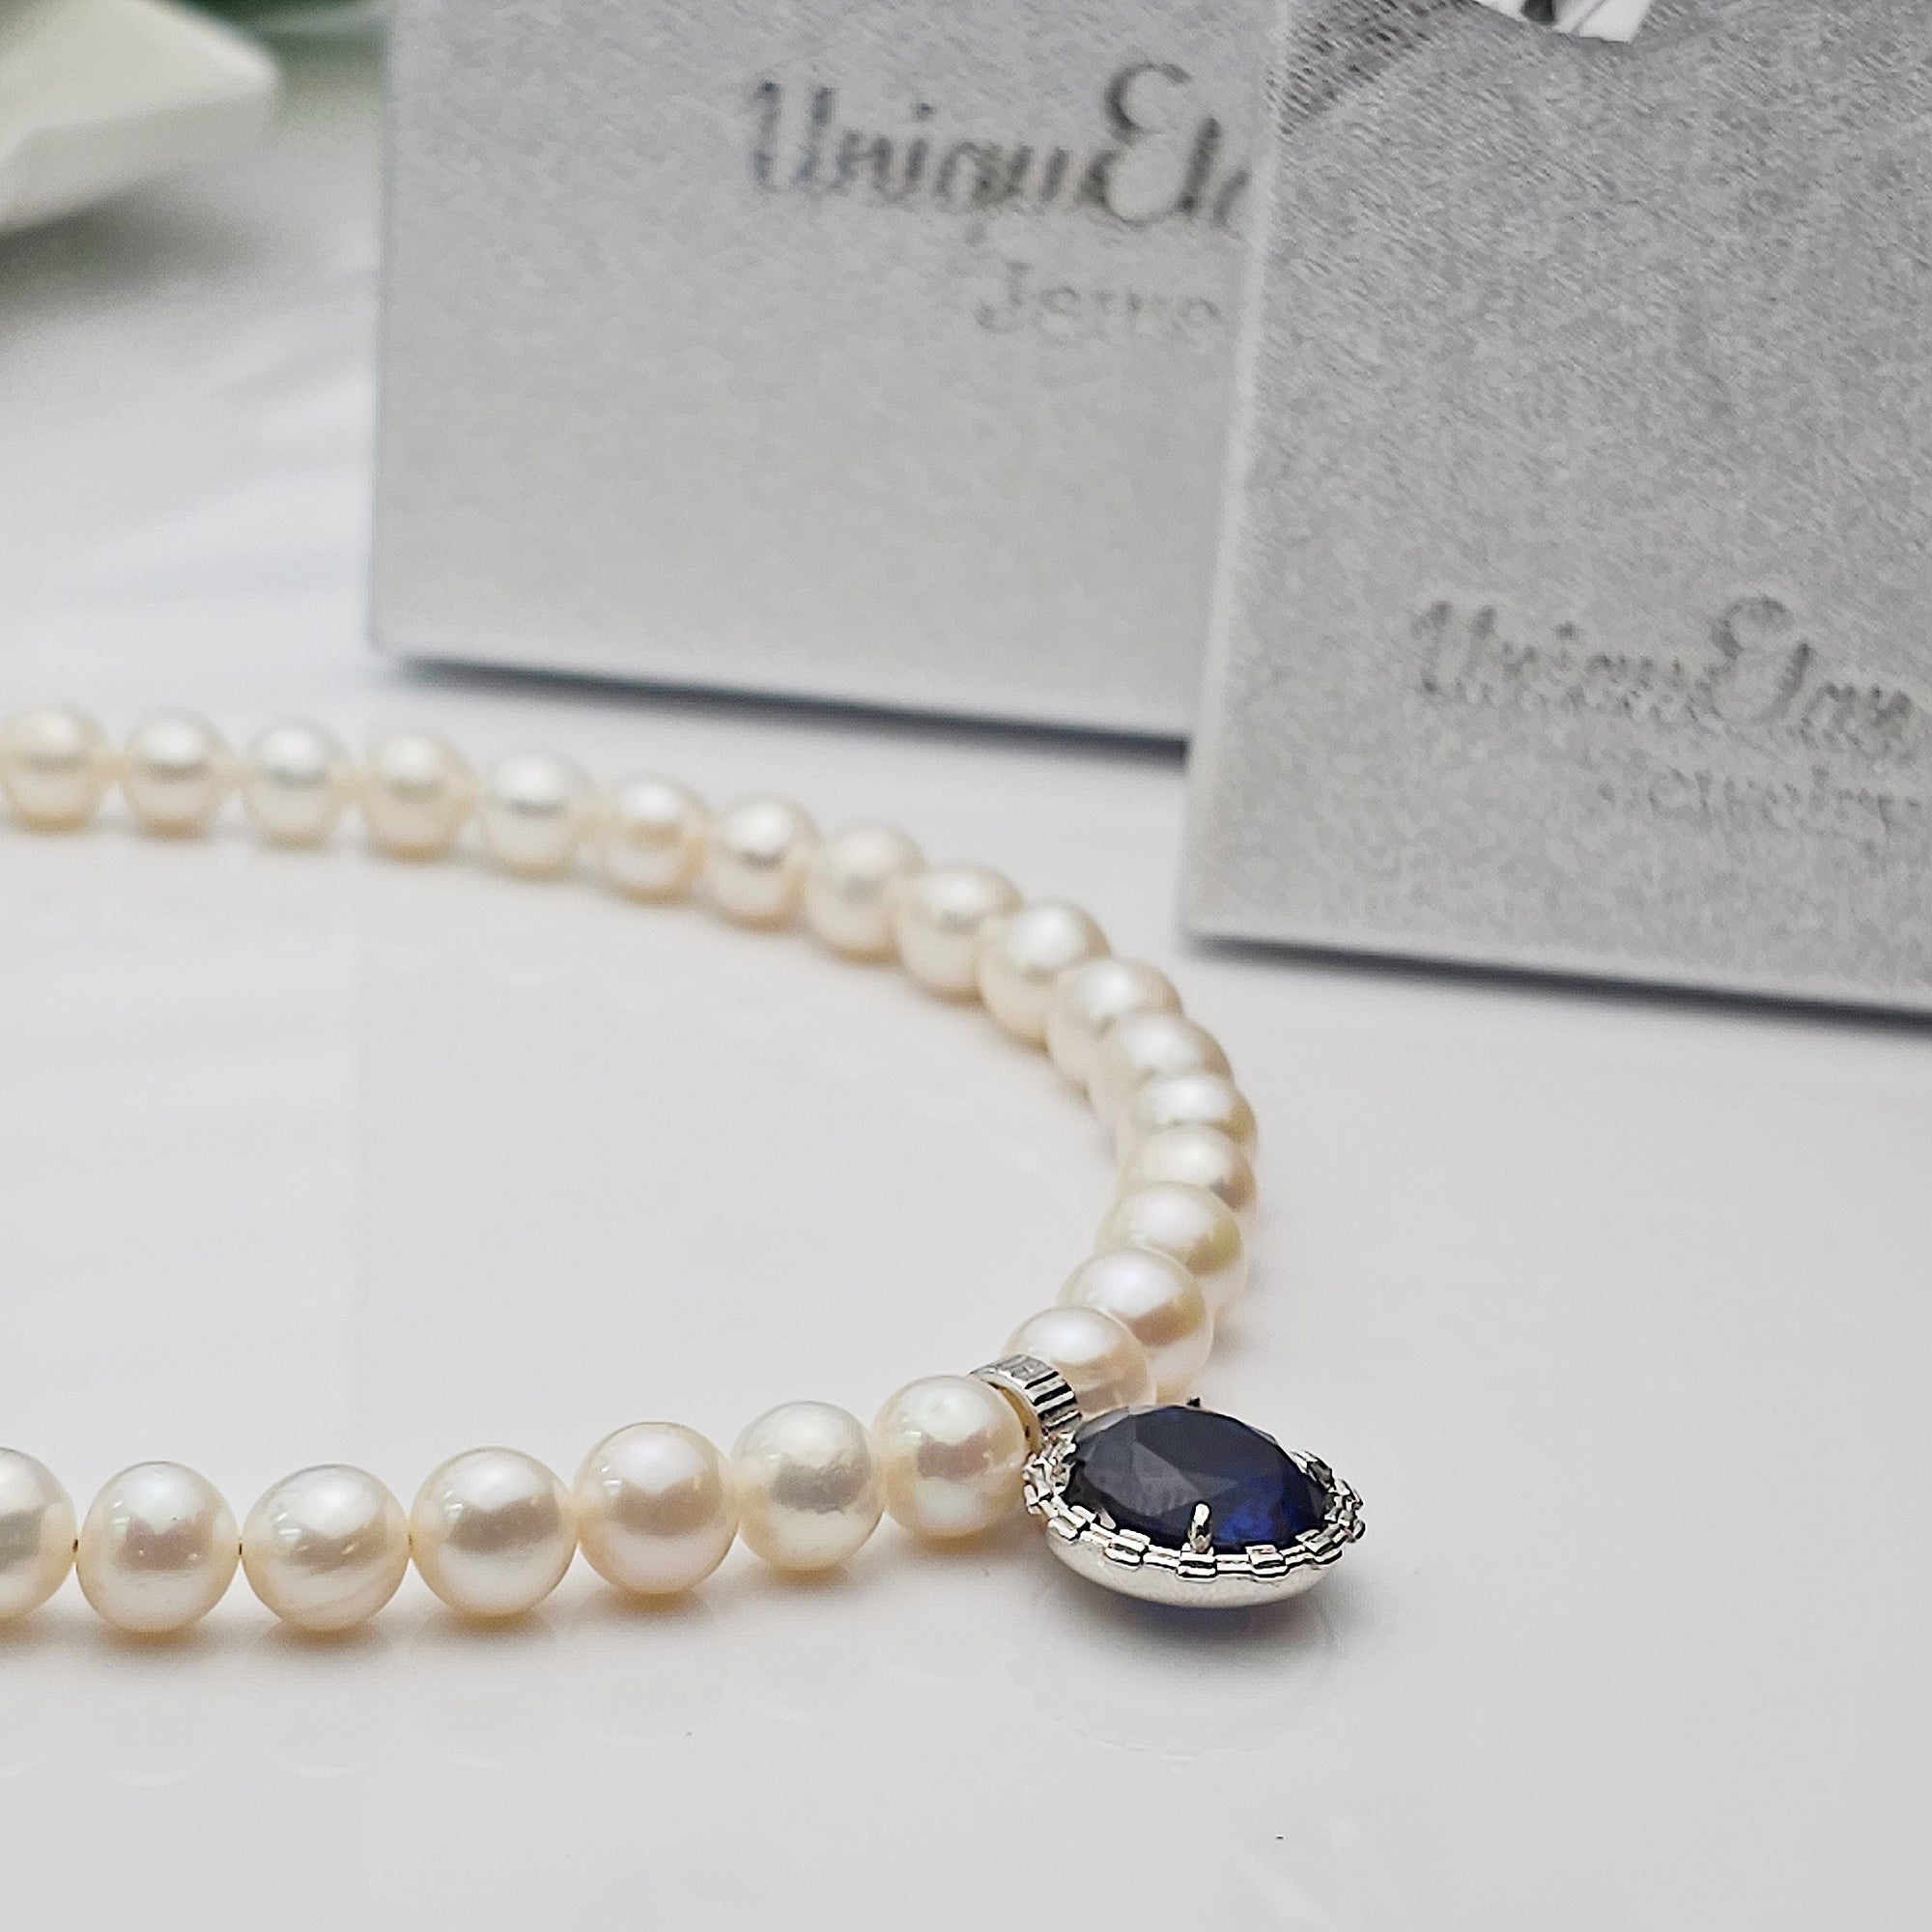 White Pearl and Sapphire Jewelry Set